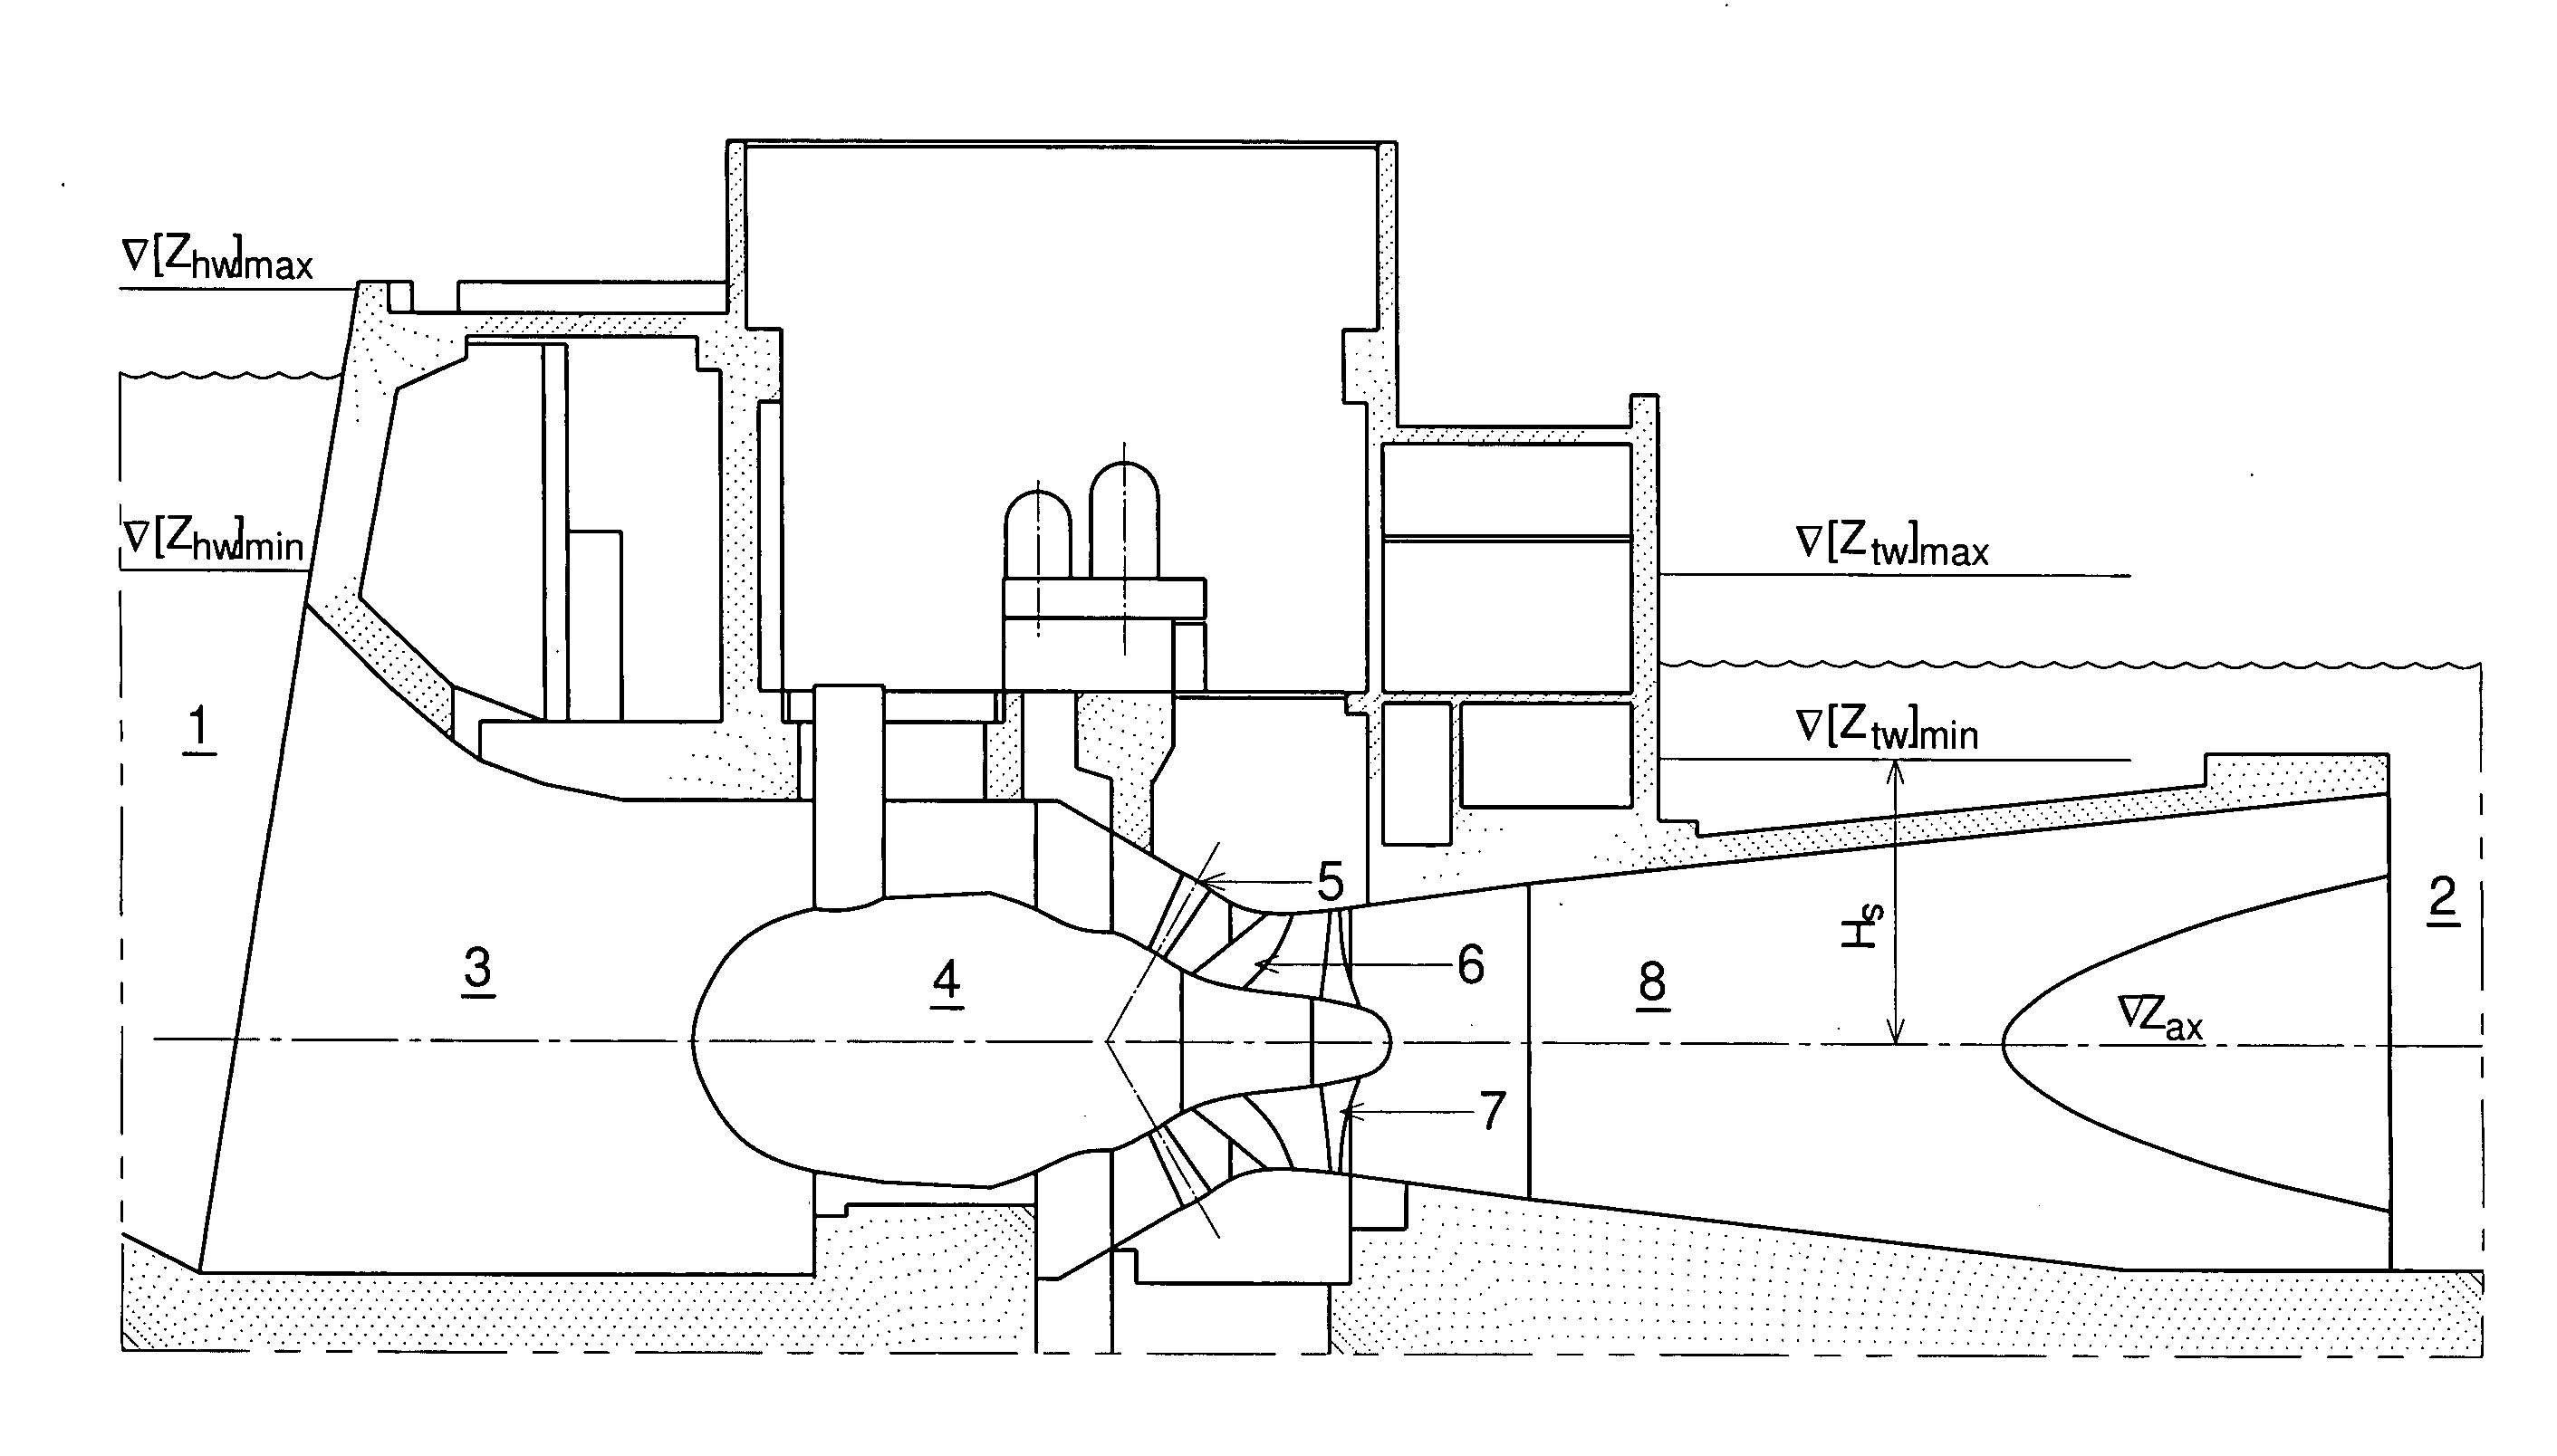 Two-way generation tidal power plant with bypasses